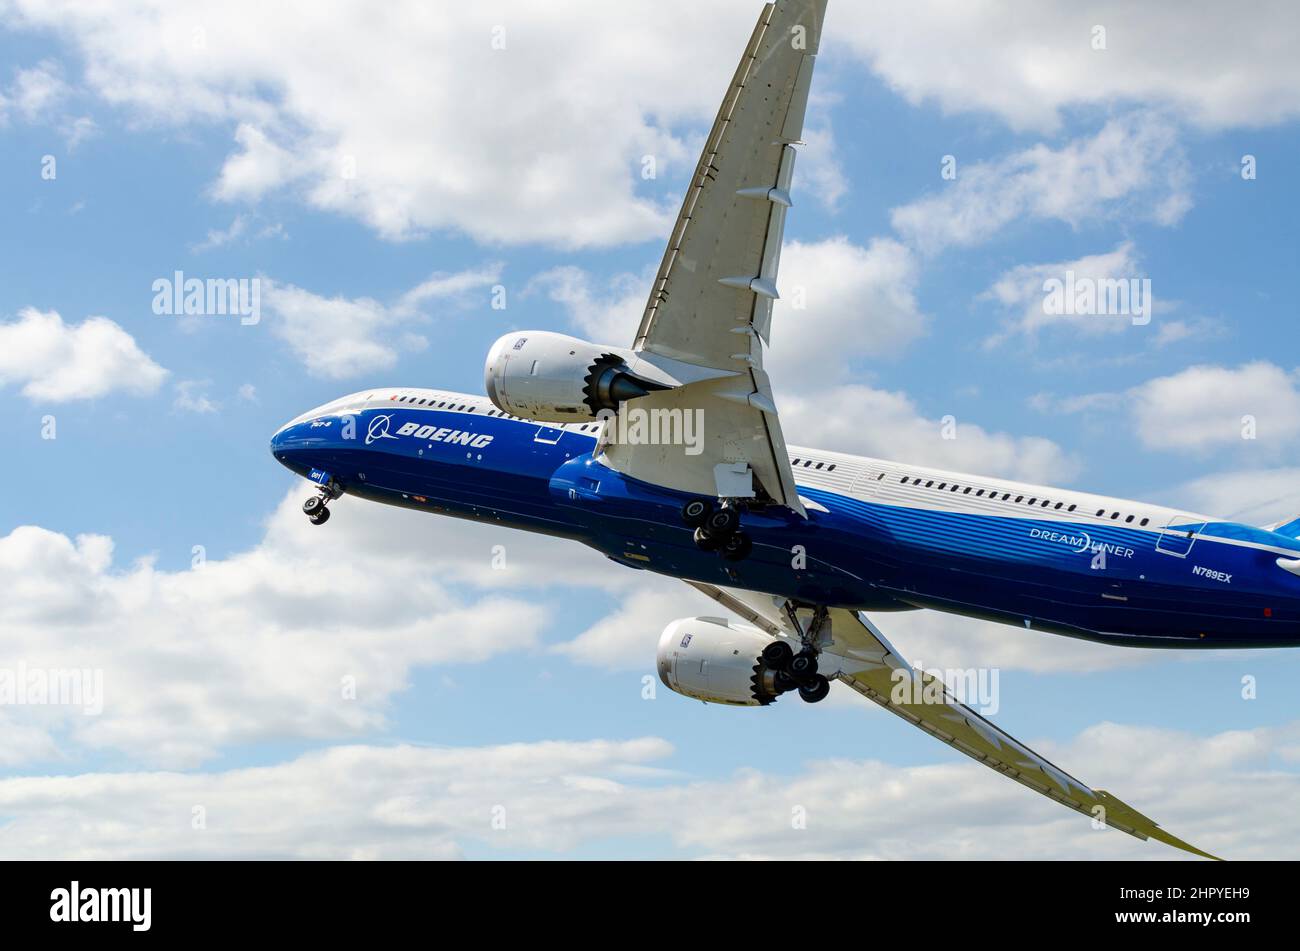 Boeing 787 Dreamliner prototype taking off at Farnborough International Airshow. Boeing corporate colour, color scheme. First Boeing 787-9 airliner Stock Photo